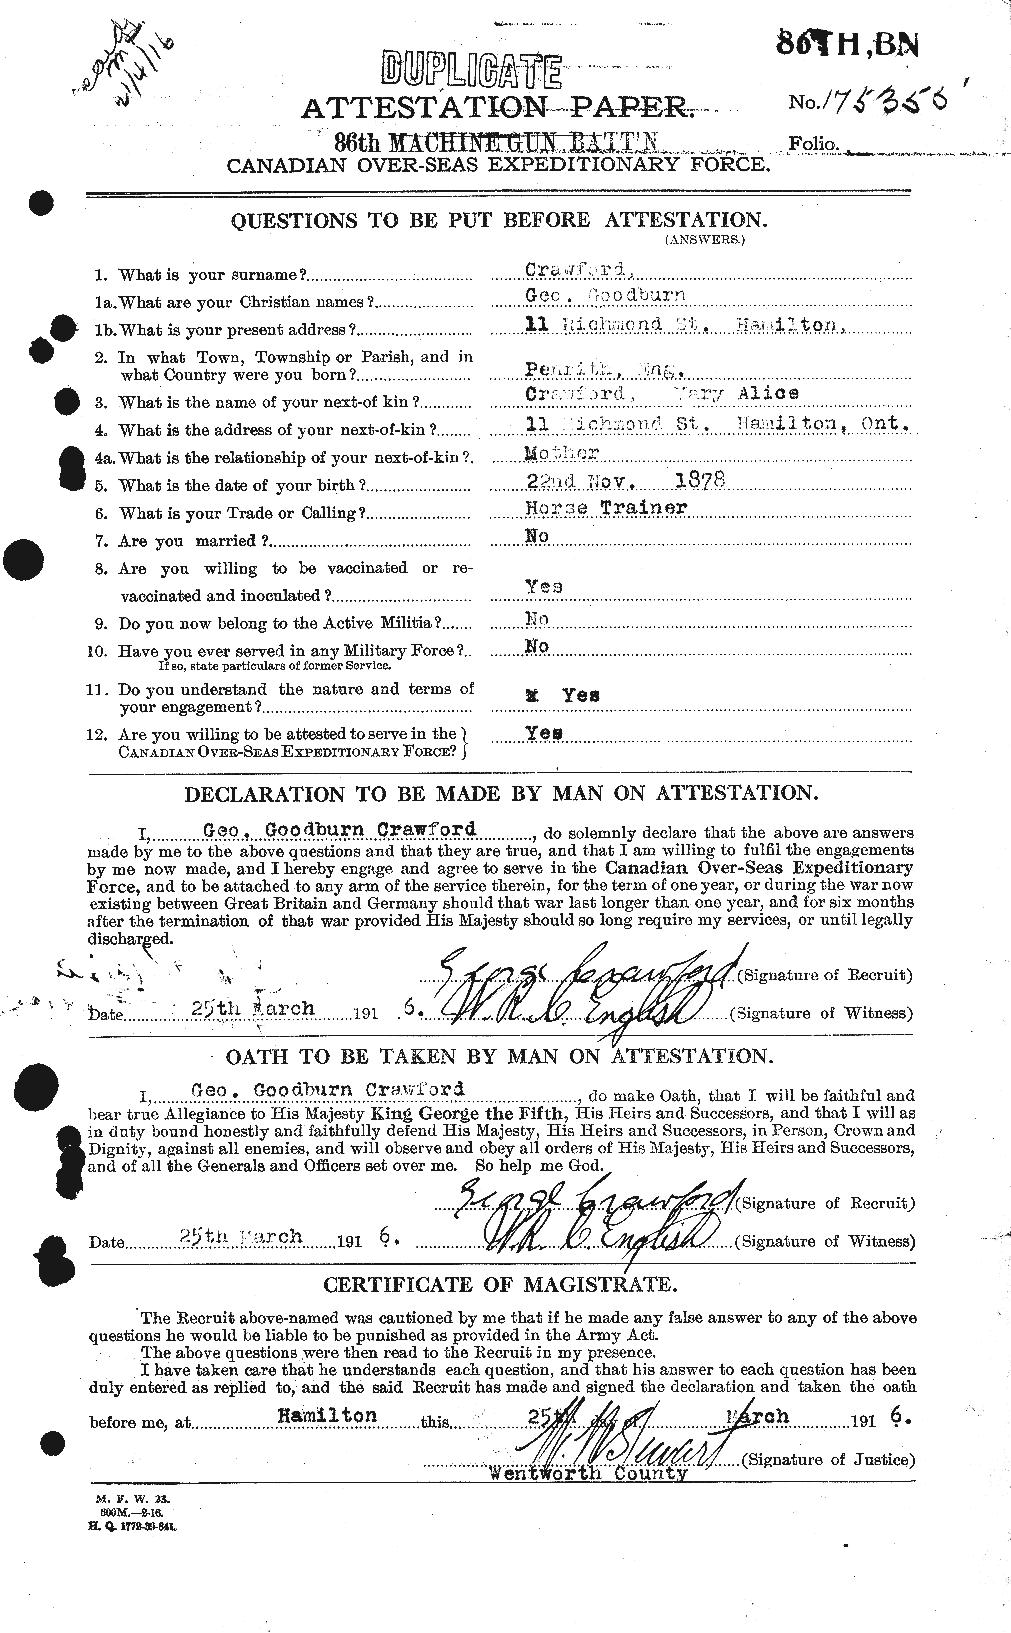 Personnel Records of the First World War - CEF 060705a